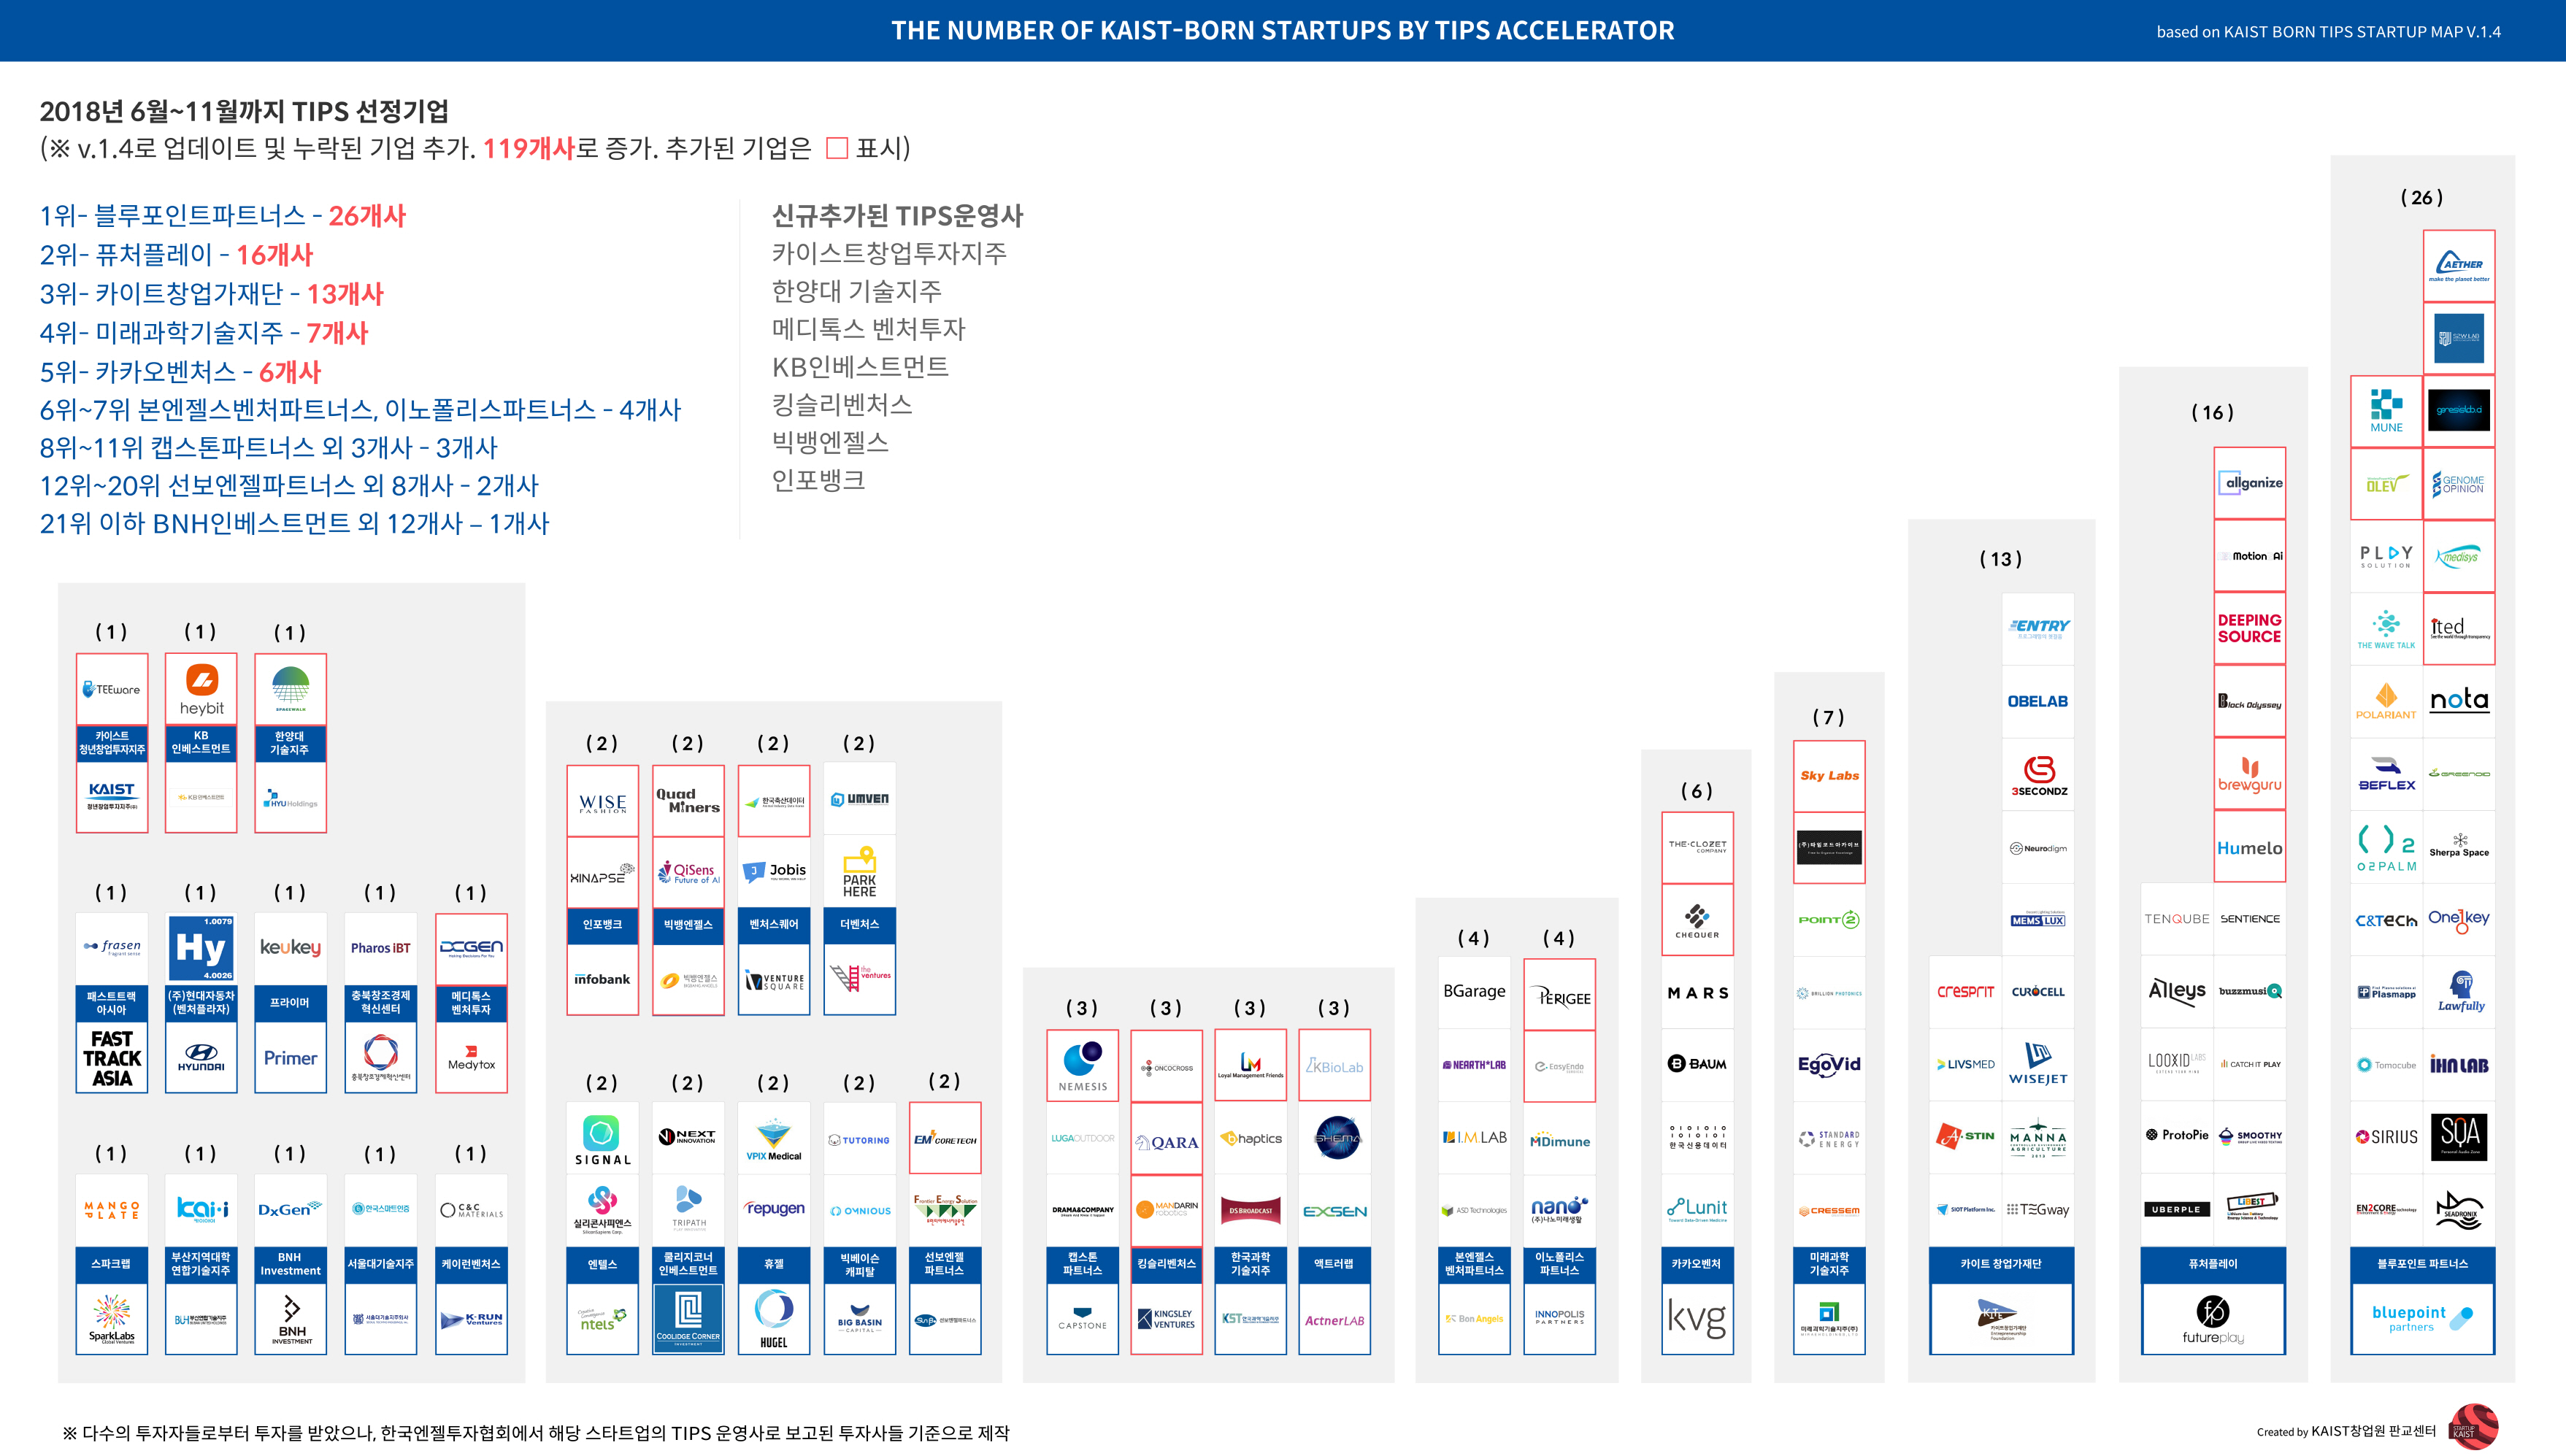 THE NUMBER OF KAIST-BORN STARTUPS INVESTED BY TIPS ACCELERATOR(2018-2)